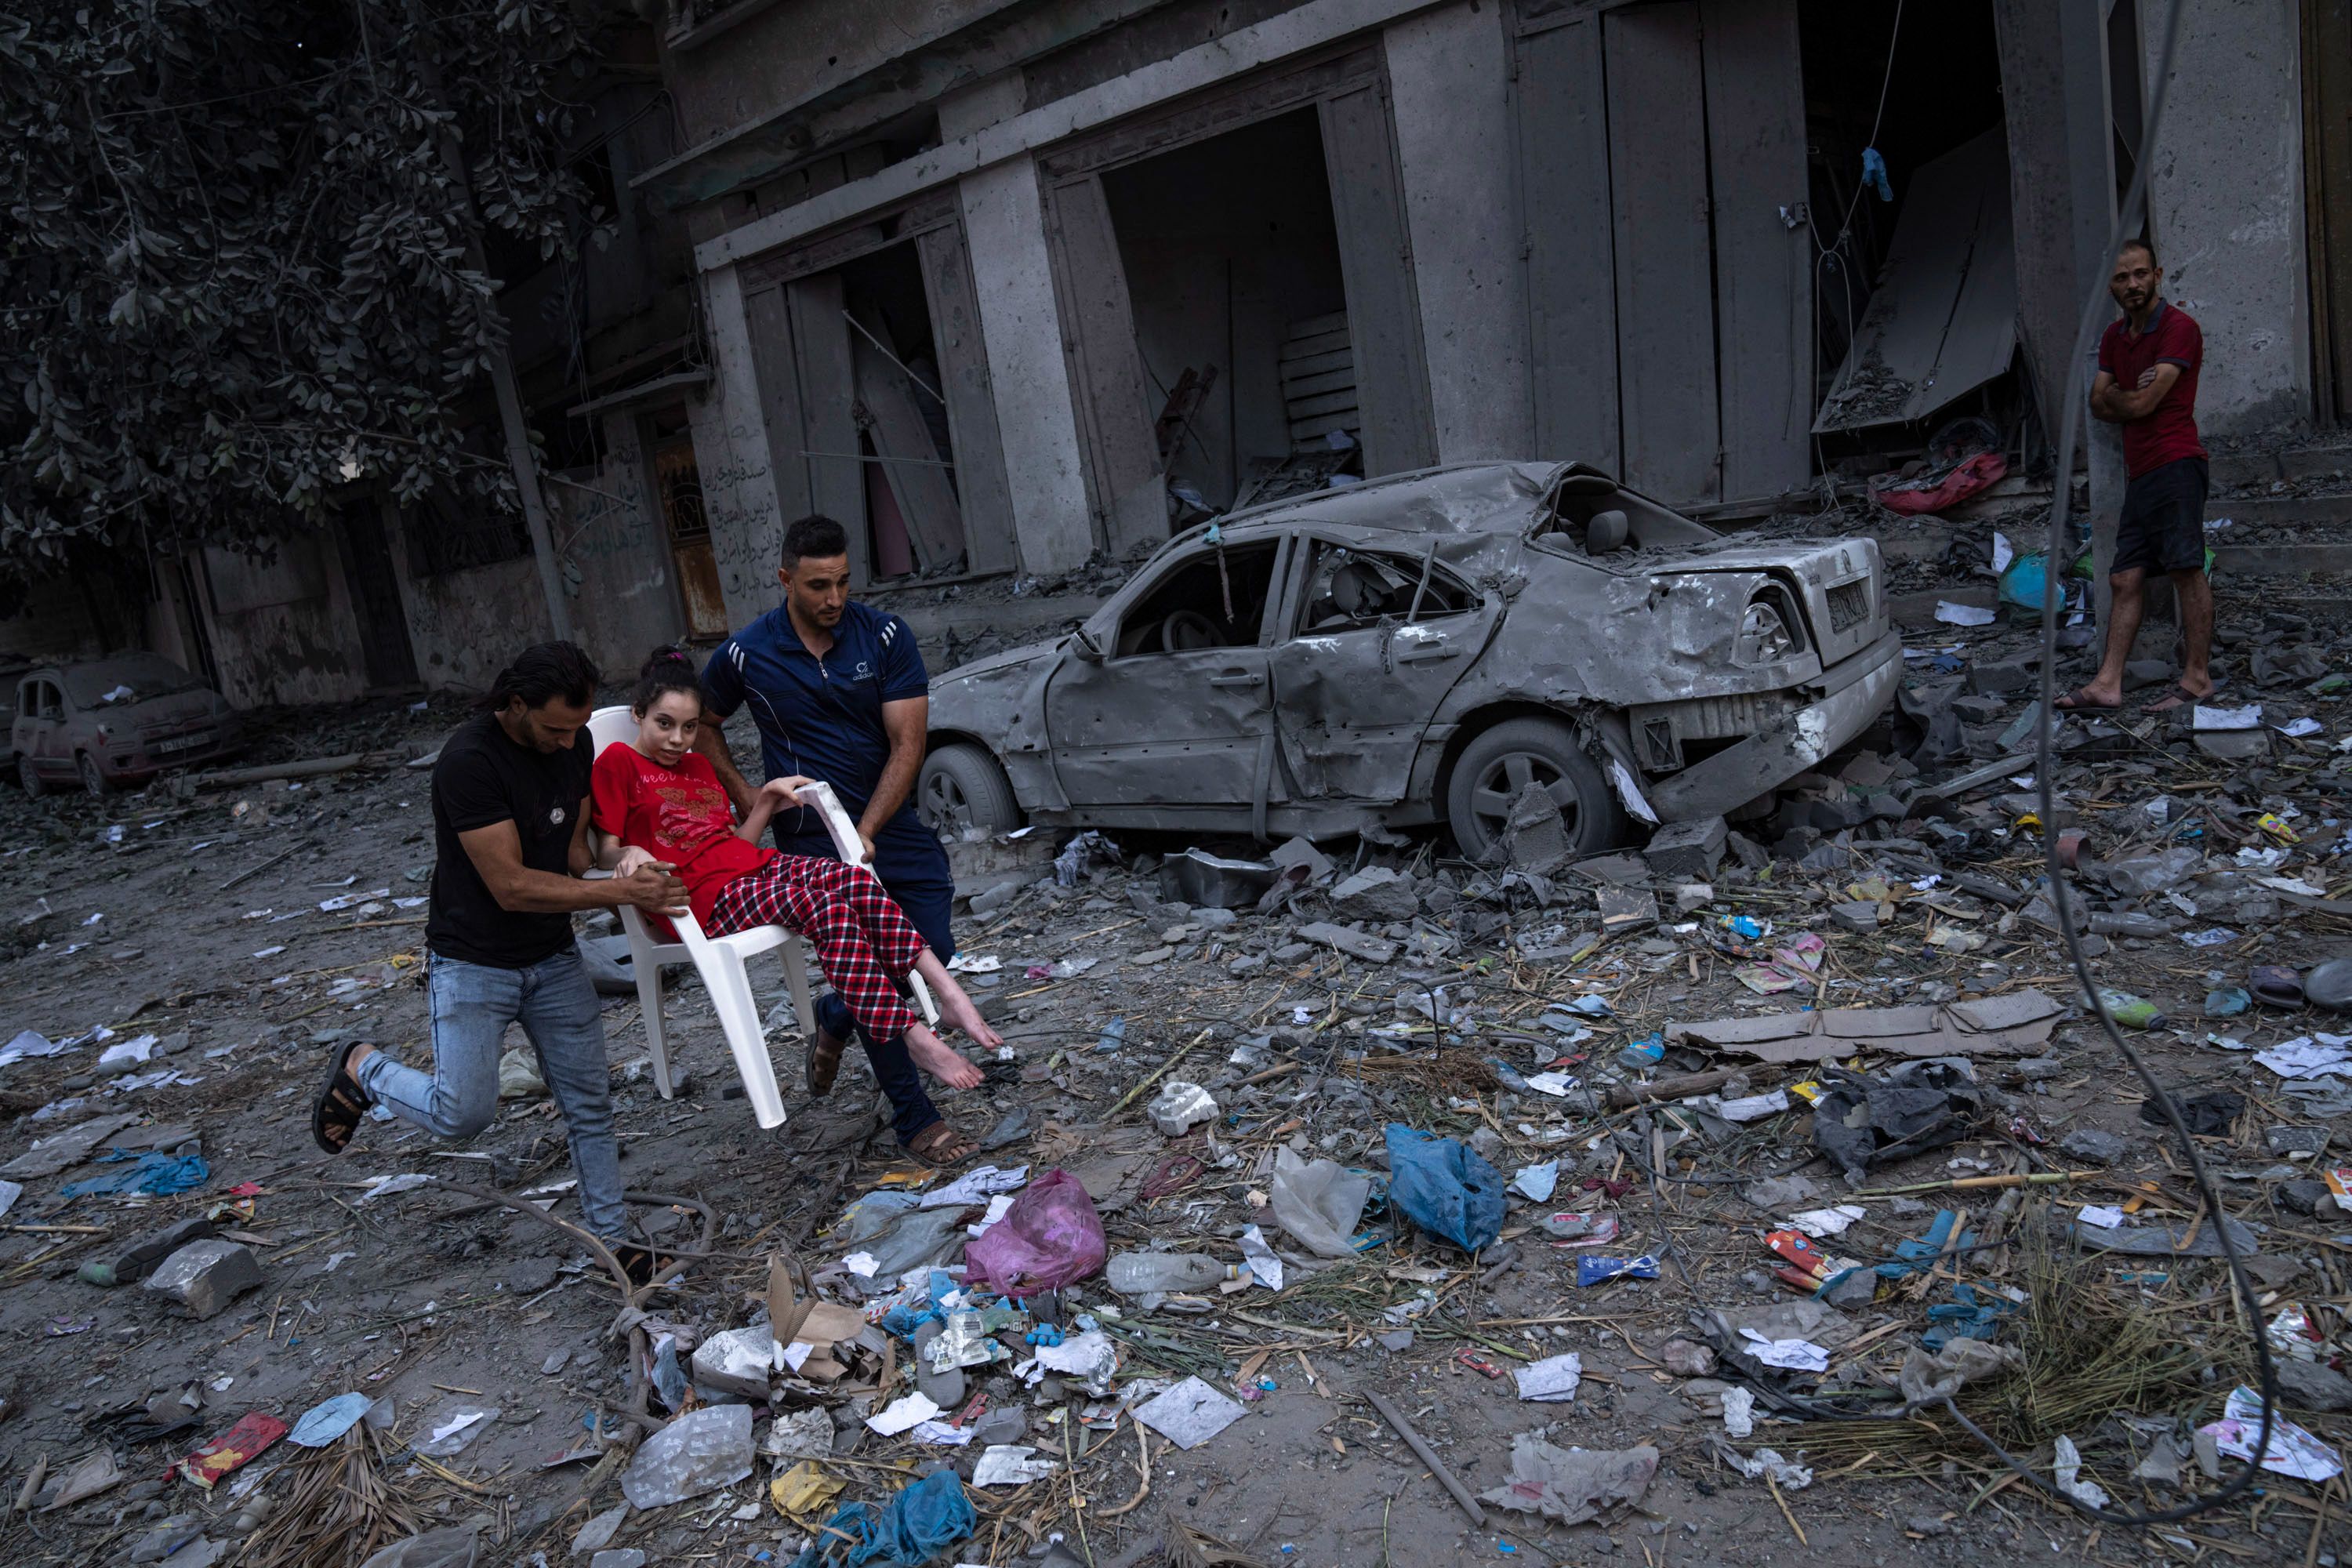 Palestinians walk amid the rubble following Israeli airstrikes in Gaza City on October 10.